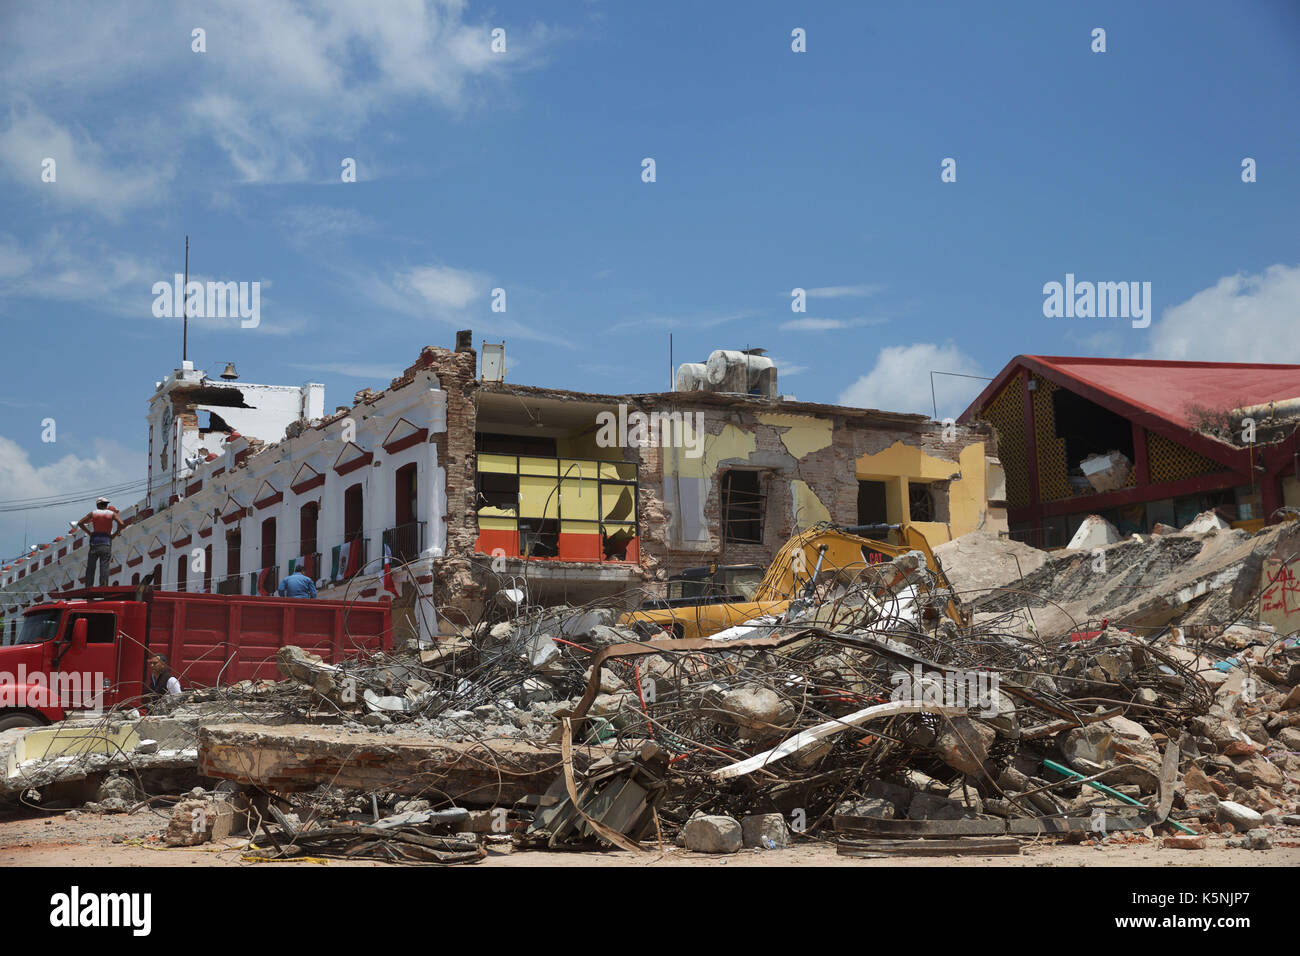 Juchitan, Mexico. 9th September, 2017. A building collapse site is seen after an earthquake hit in Juchitan, Oaxaca state, Mexico, Sept. 9, 2017. A powerful earthquake measuring 8.2 on the Richter scale struck off Mexico's southern coast late Thursday night, killing 90 people. Credit: Xinhua/Alamy Live News Stock Photo